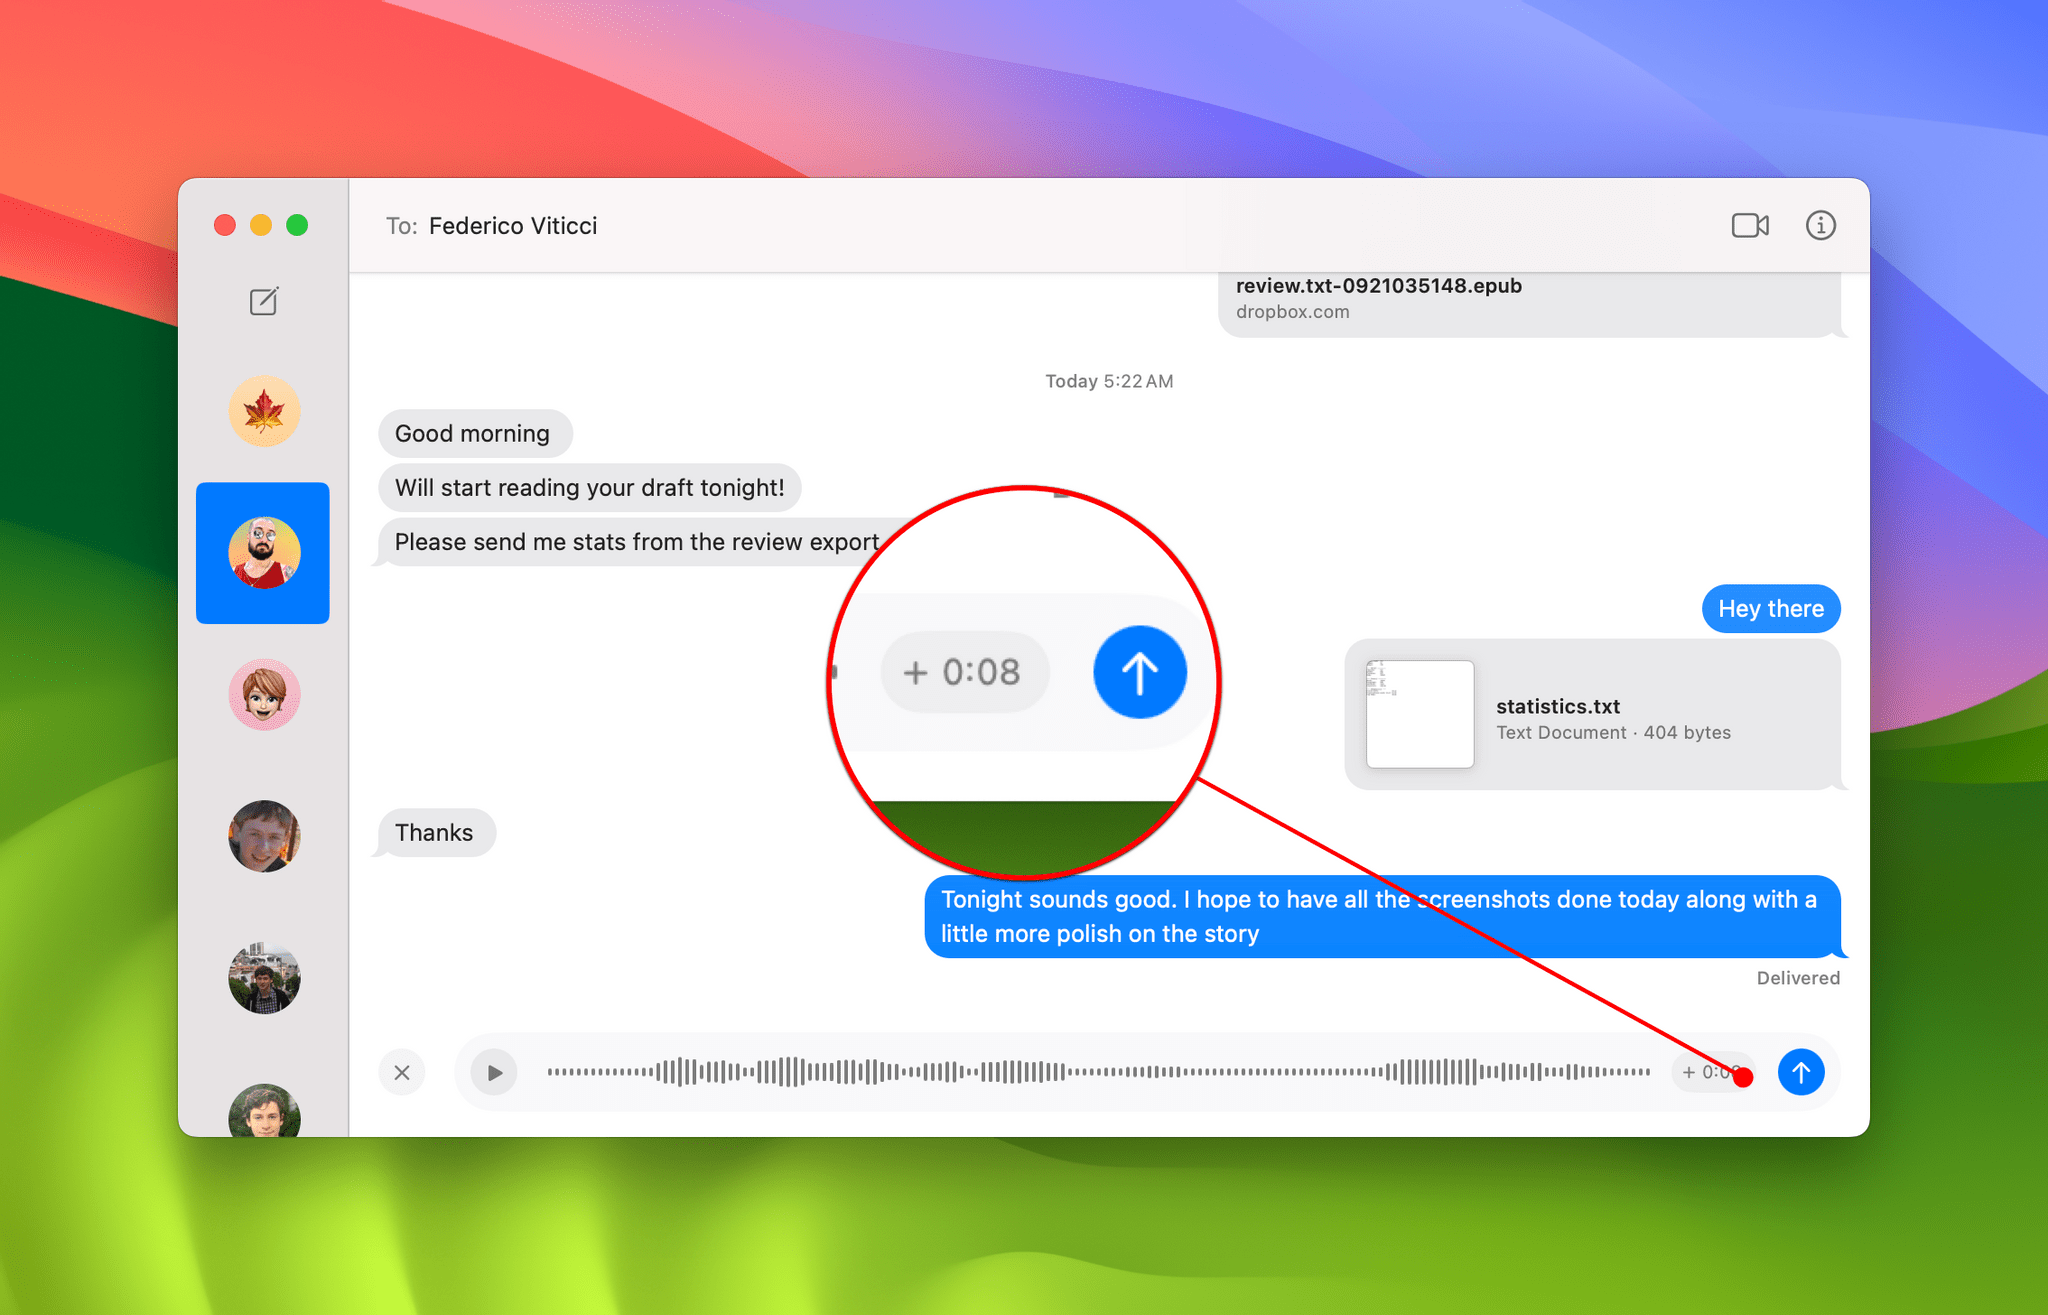 You can stop an audio message and pick up again where you left off before sending it.